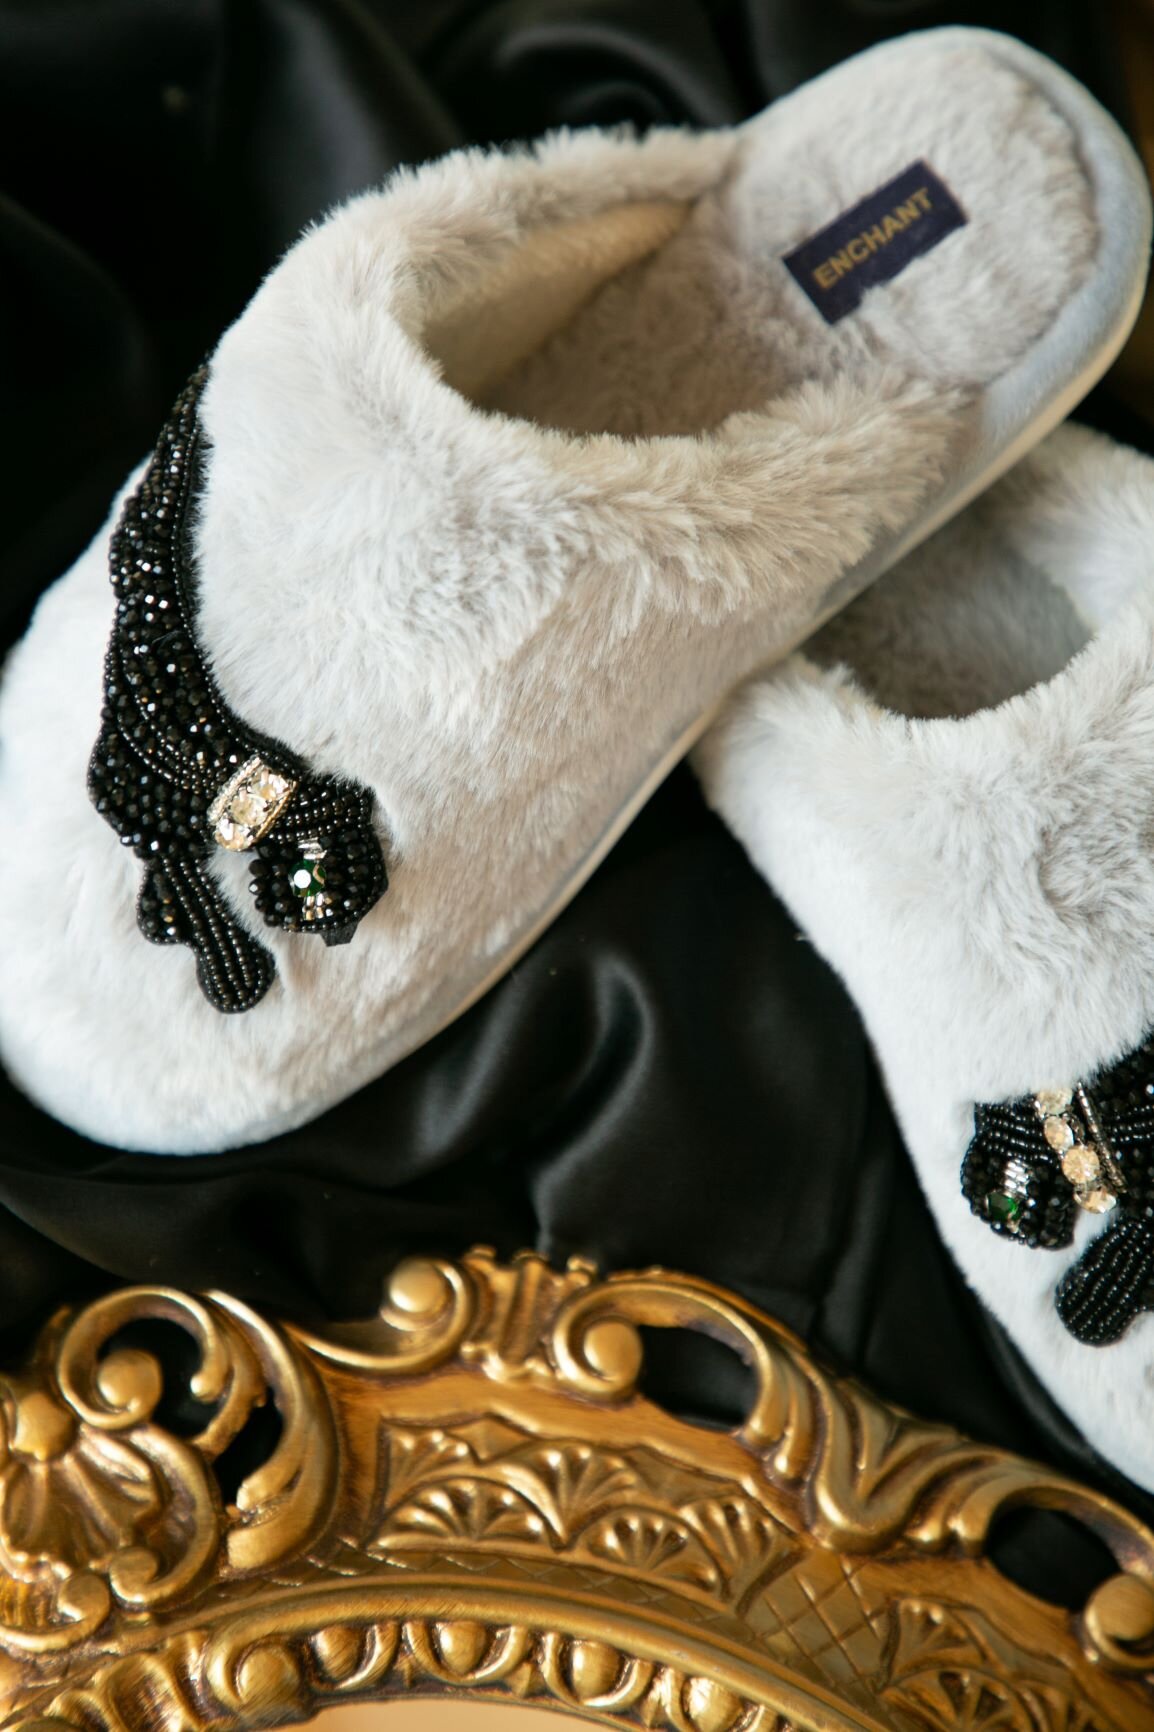 Grey Panther Slippers Detail and Black Silk Scarf 4.JPG